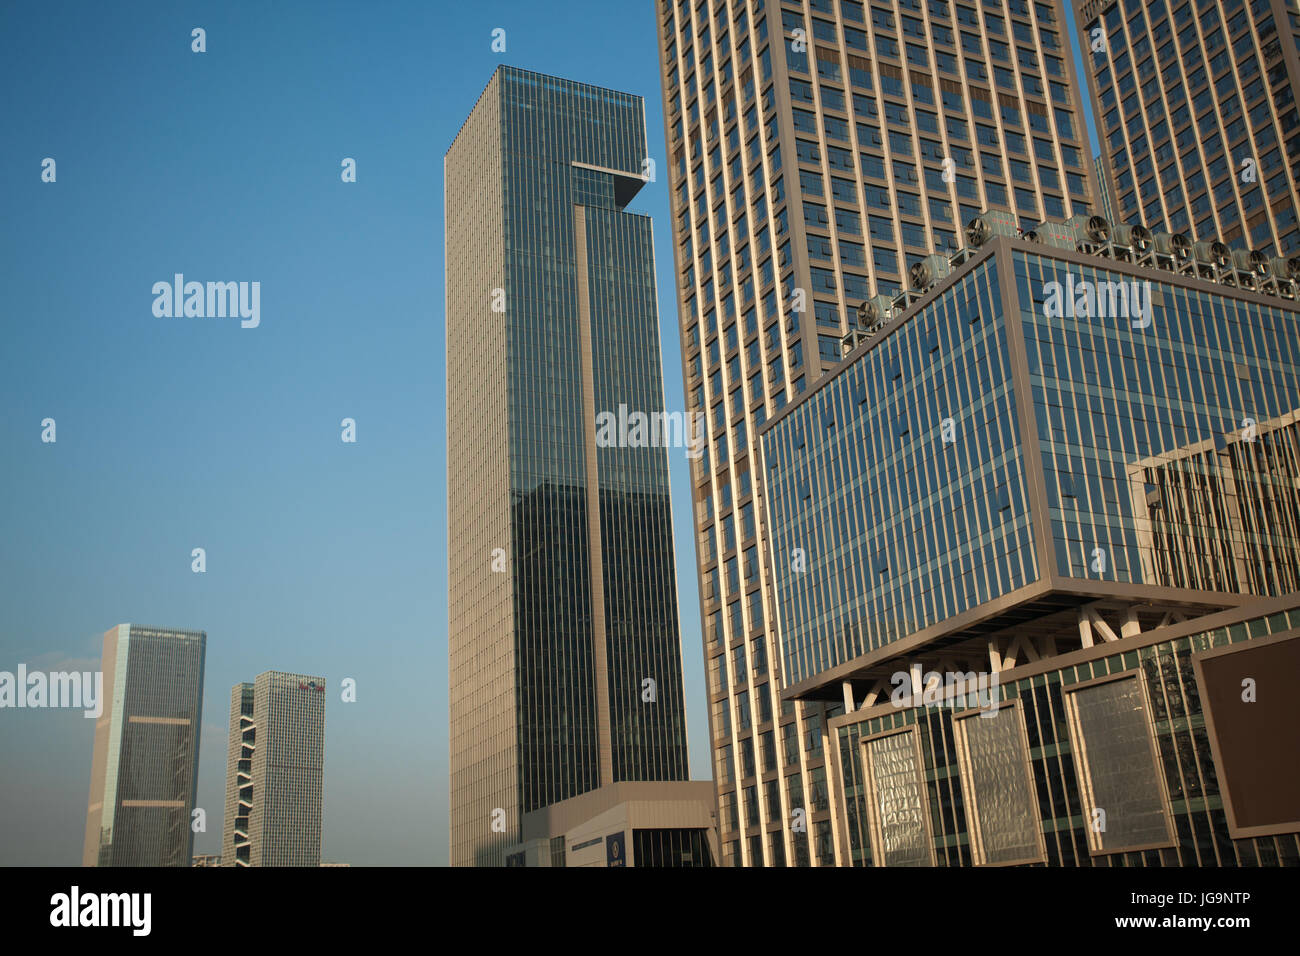 Skycrapers and office buildings; Nanshan district, Shenzhen; Guangdong province; People's republic of China Stock Photo